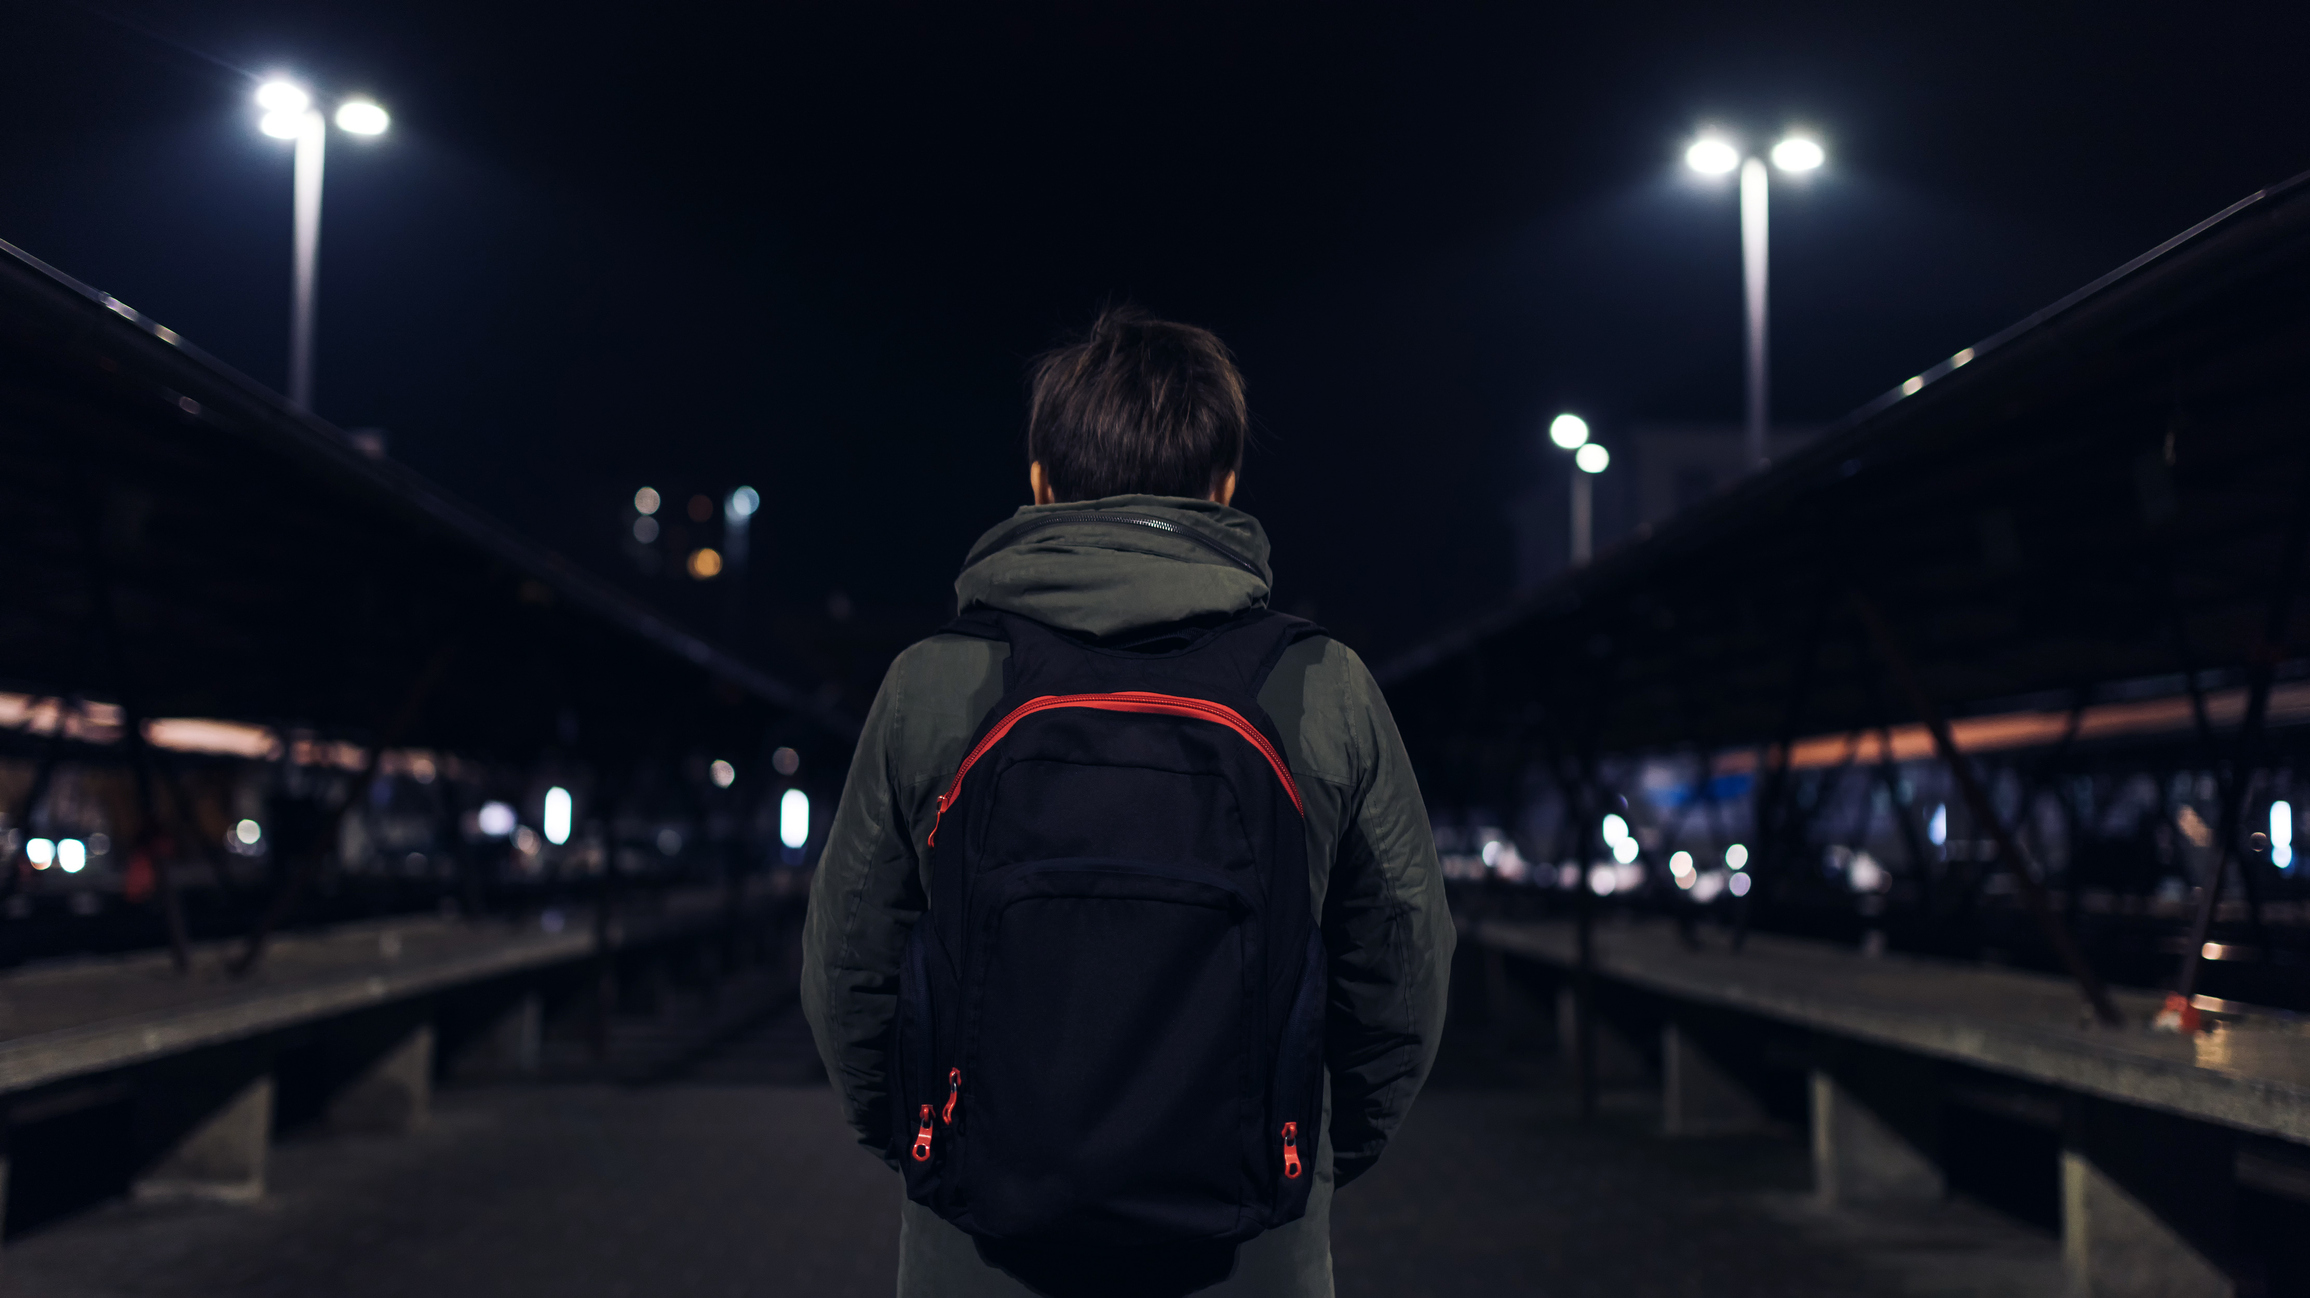 Young Person with their back to the camera wearing a rucksack. Picture at night with street lighting visible